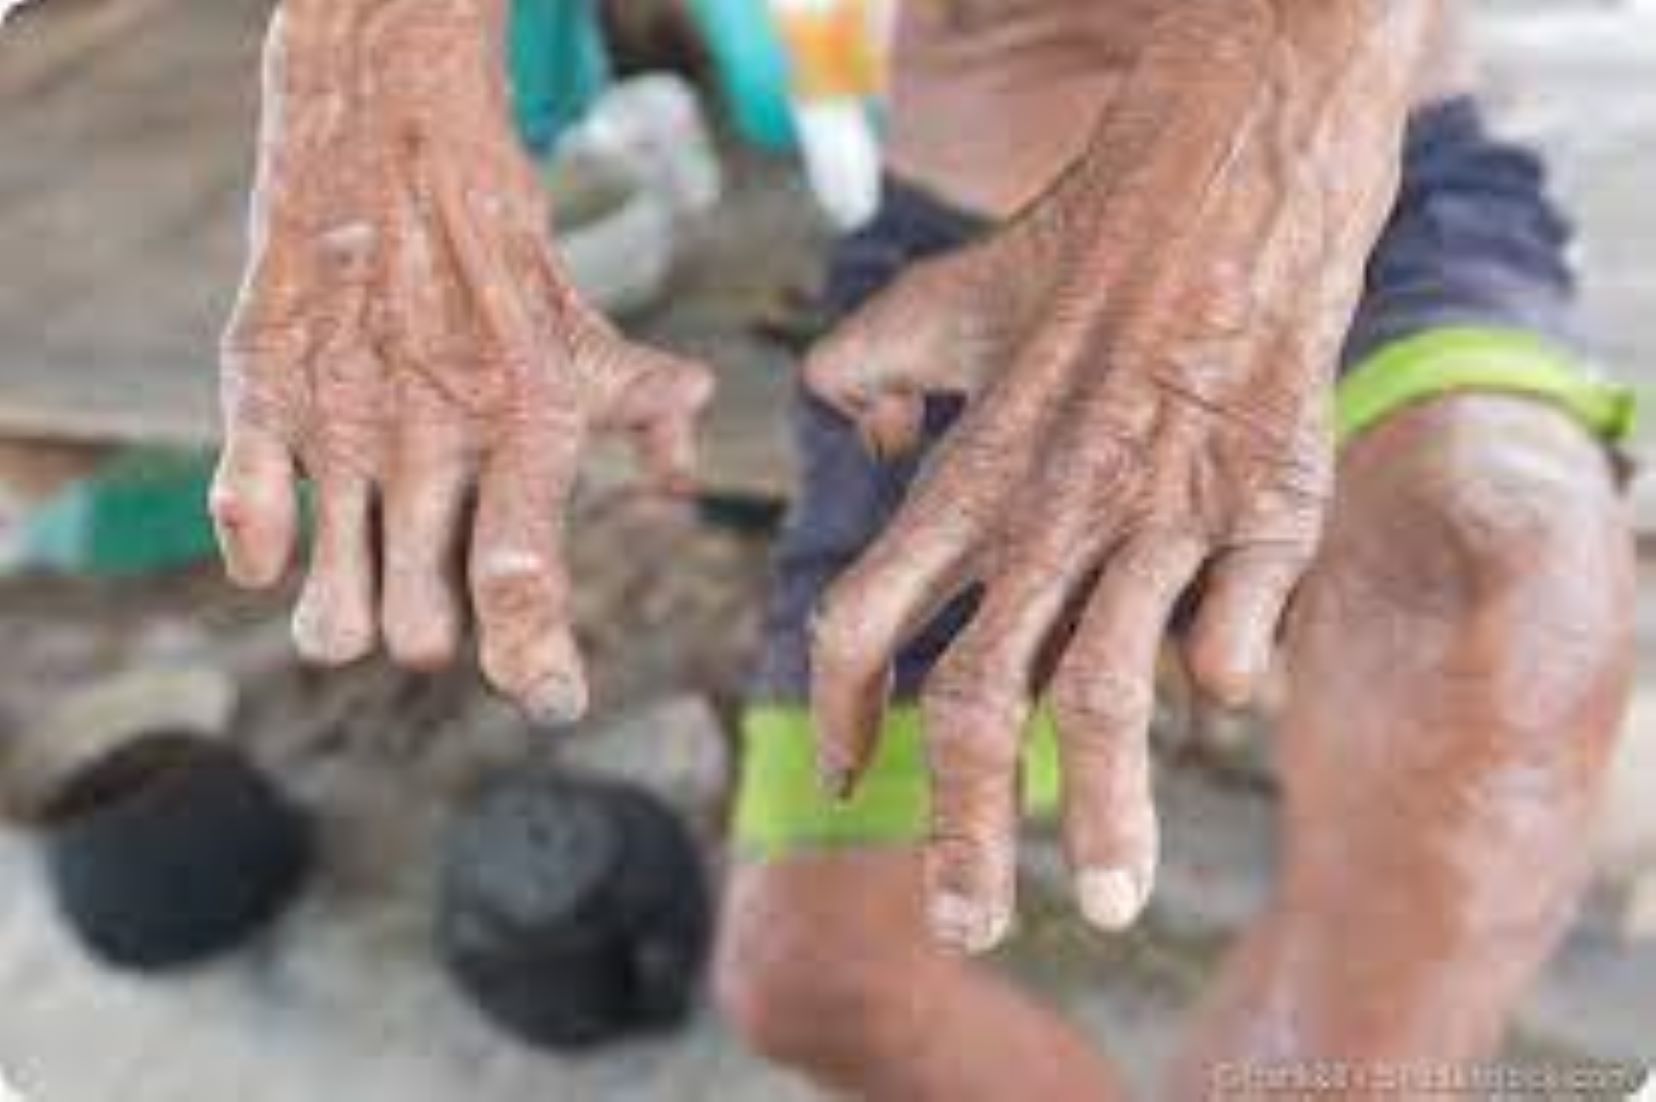 Malaysia Saw 40 Percent Rise In Leprosy Cases Last Year